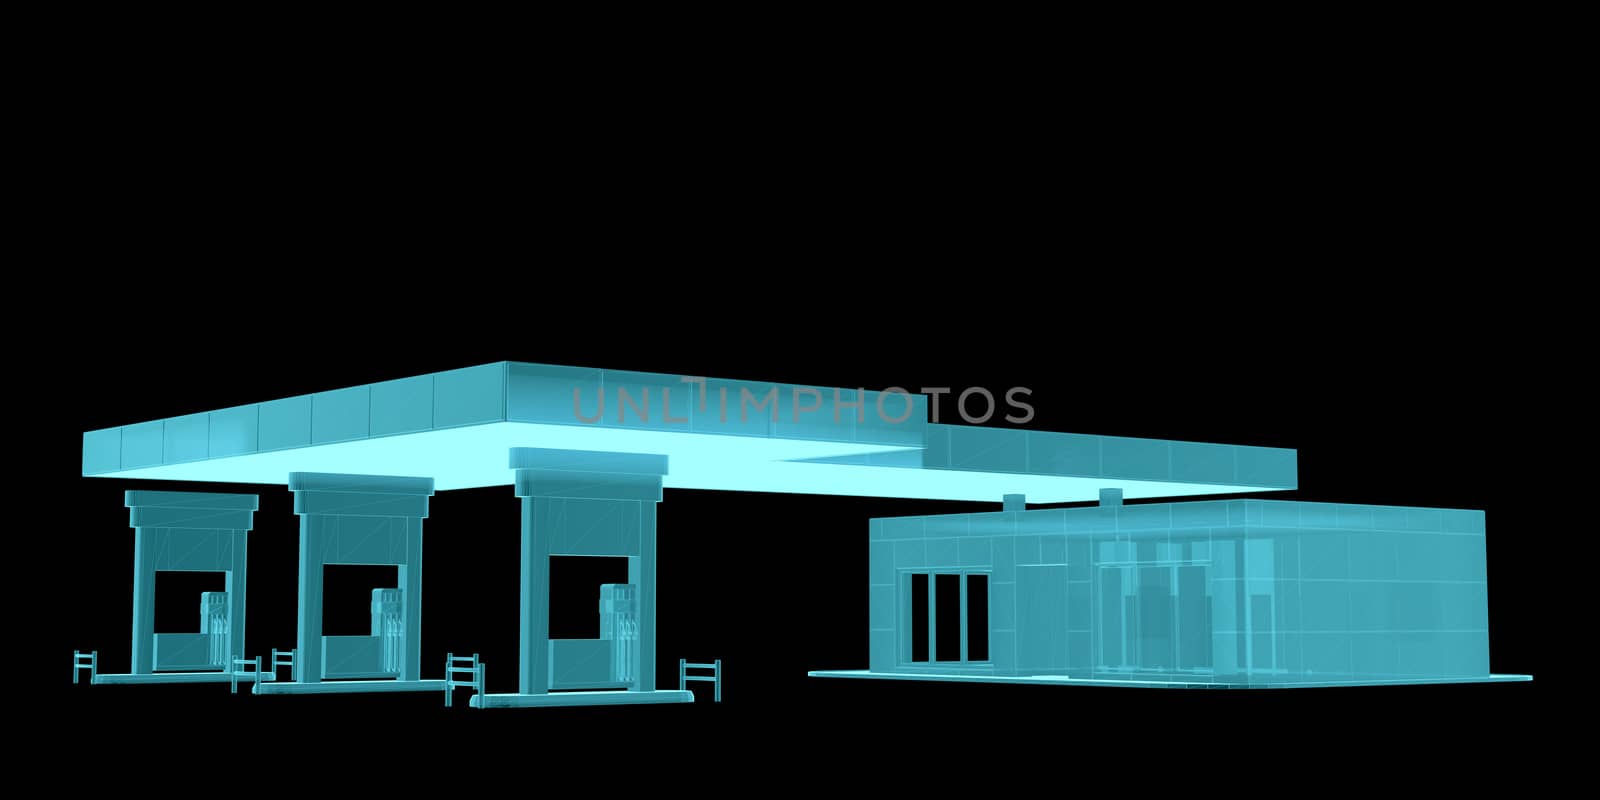 Gas Station. X-Ray image. 3d illustration. Industry concept